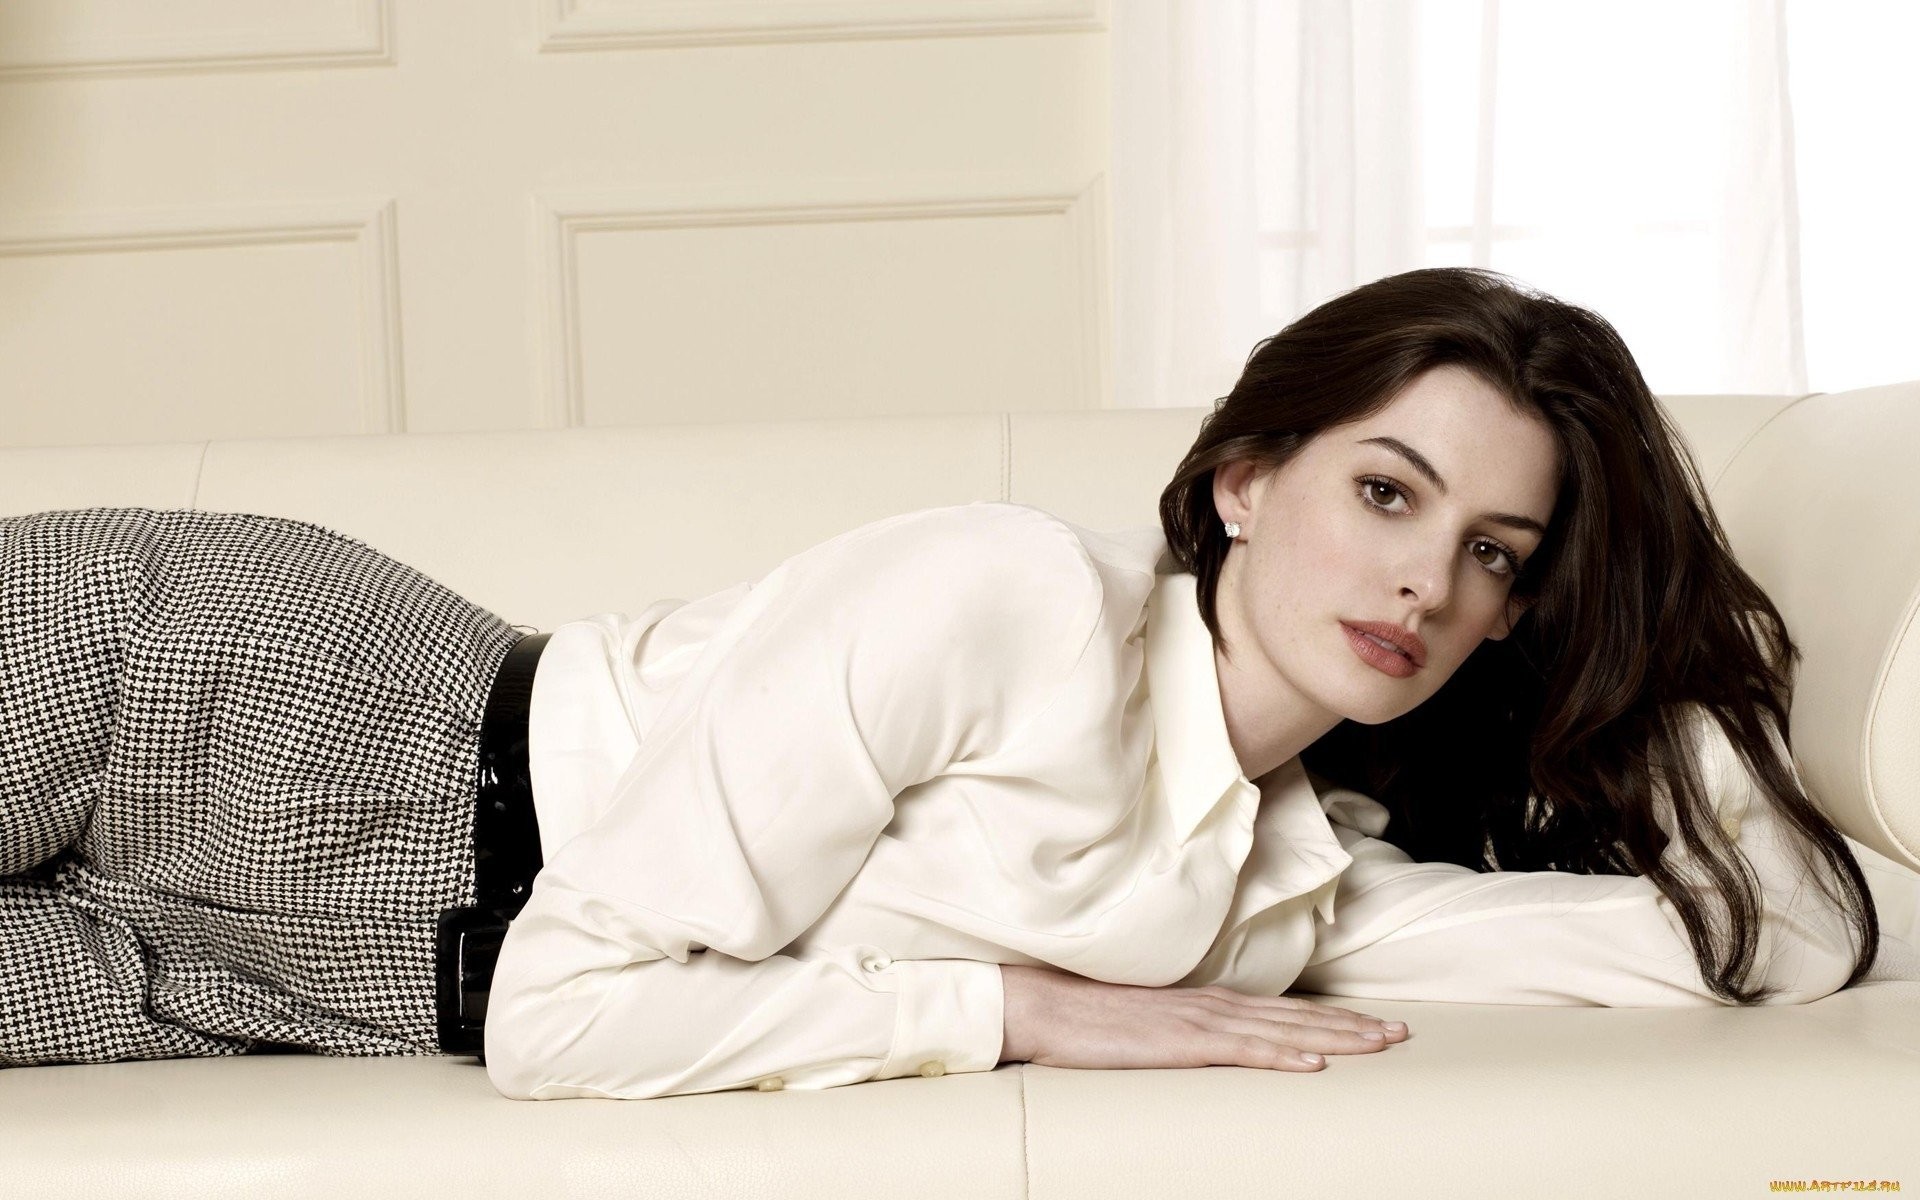 1920x1200 Anne Hathaway HD Images : Get Free top quality Anne Hathaway HD Images for  your desktop PC background, ios or android mobile phones at WOWHDBackgro…